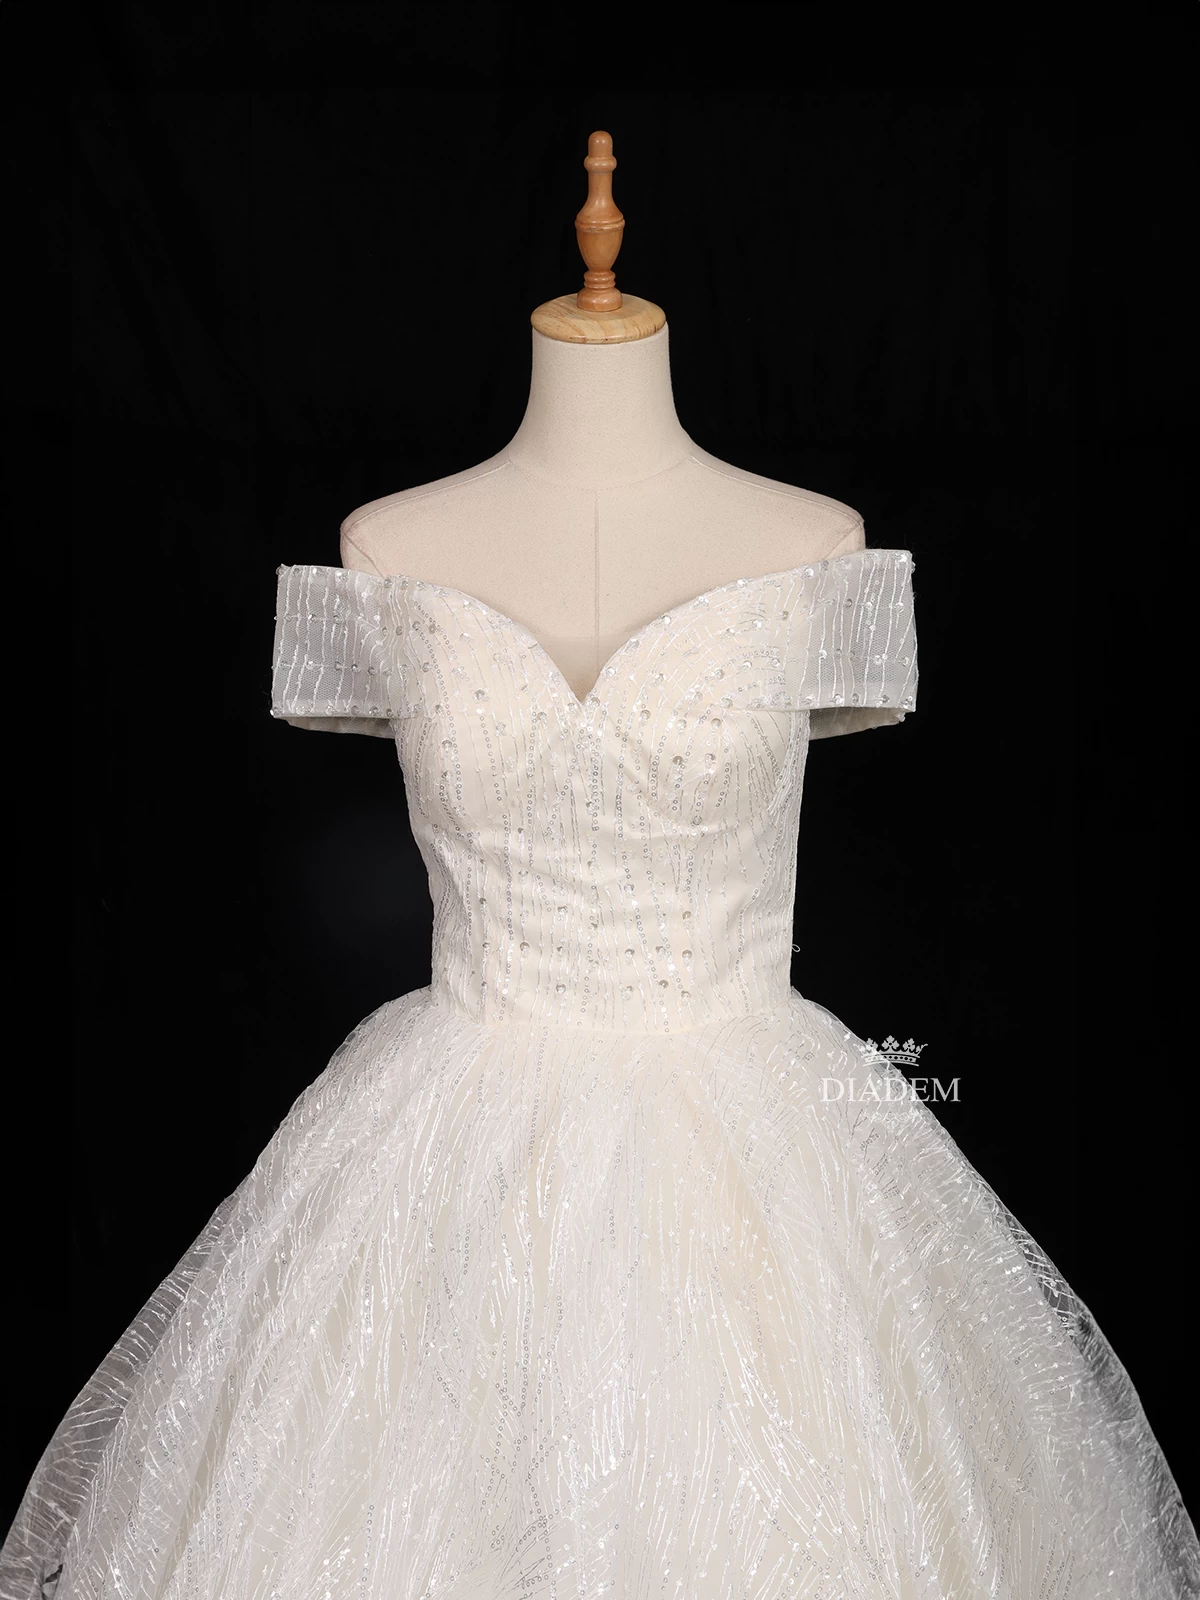 White Net Off-shoulder Ball Gown Embellished With Floral Threadwork And Sequins